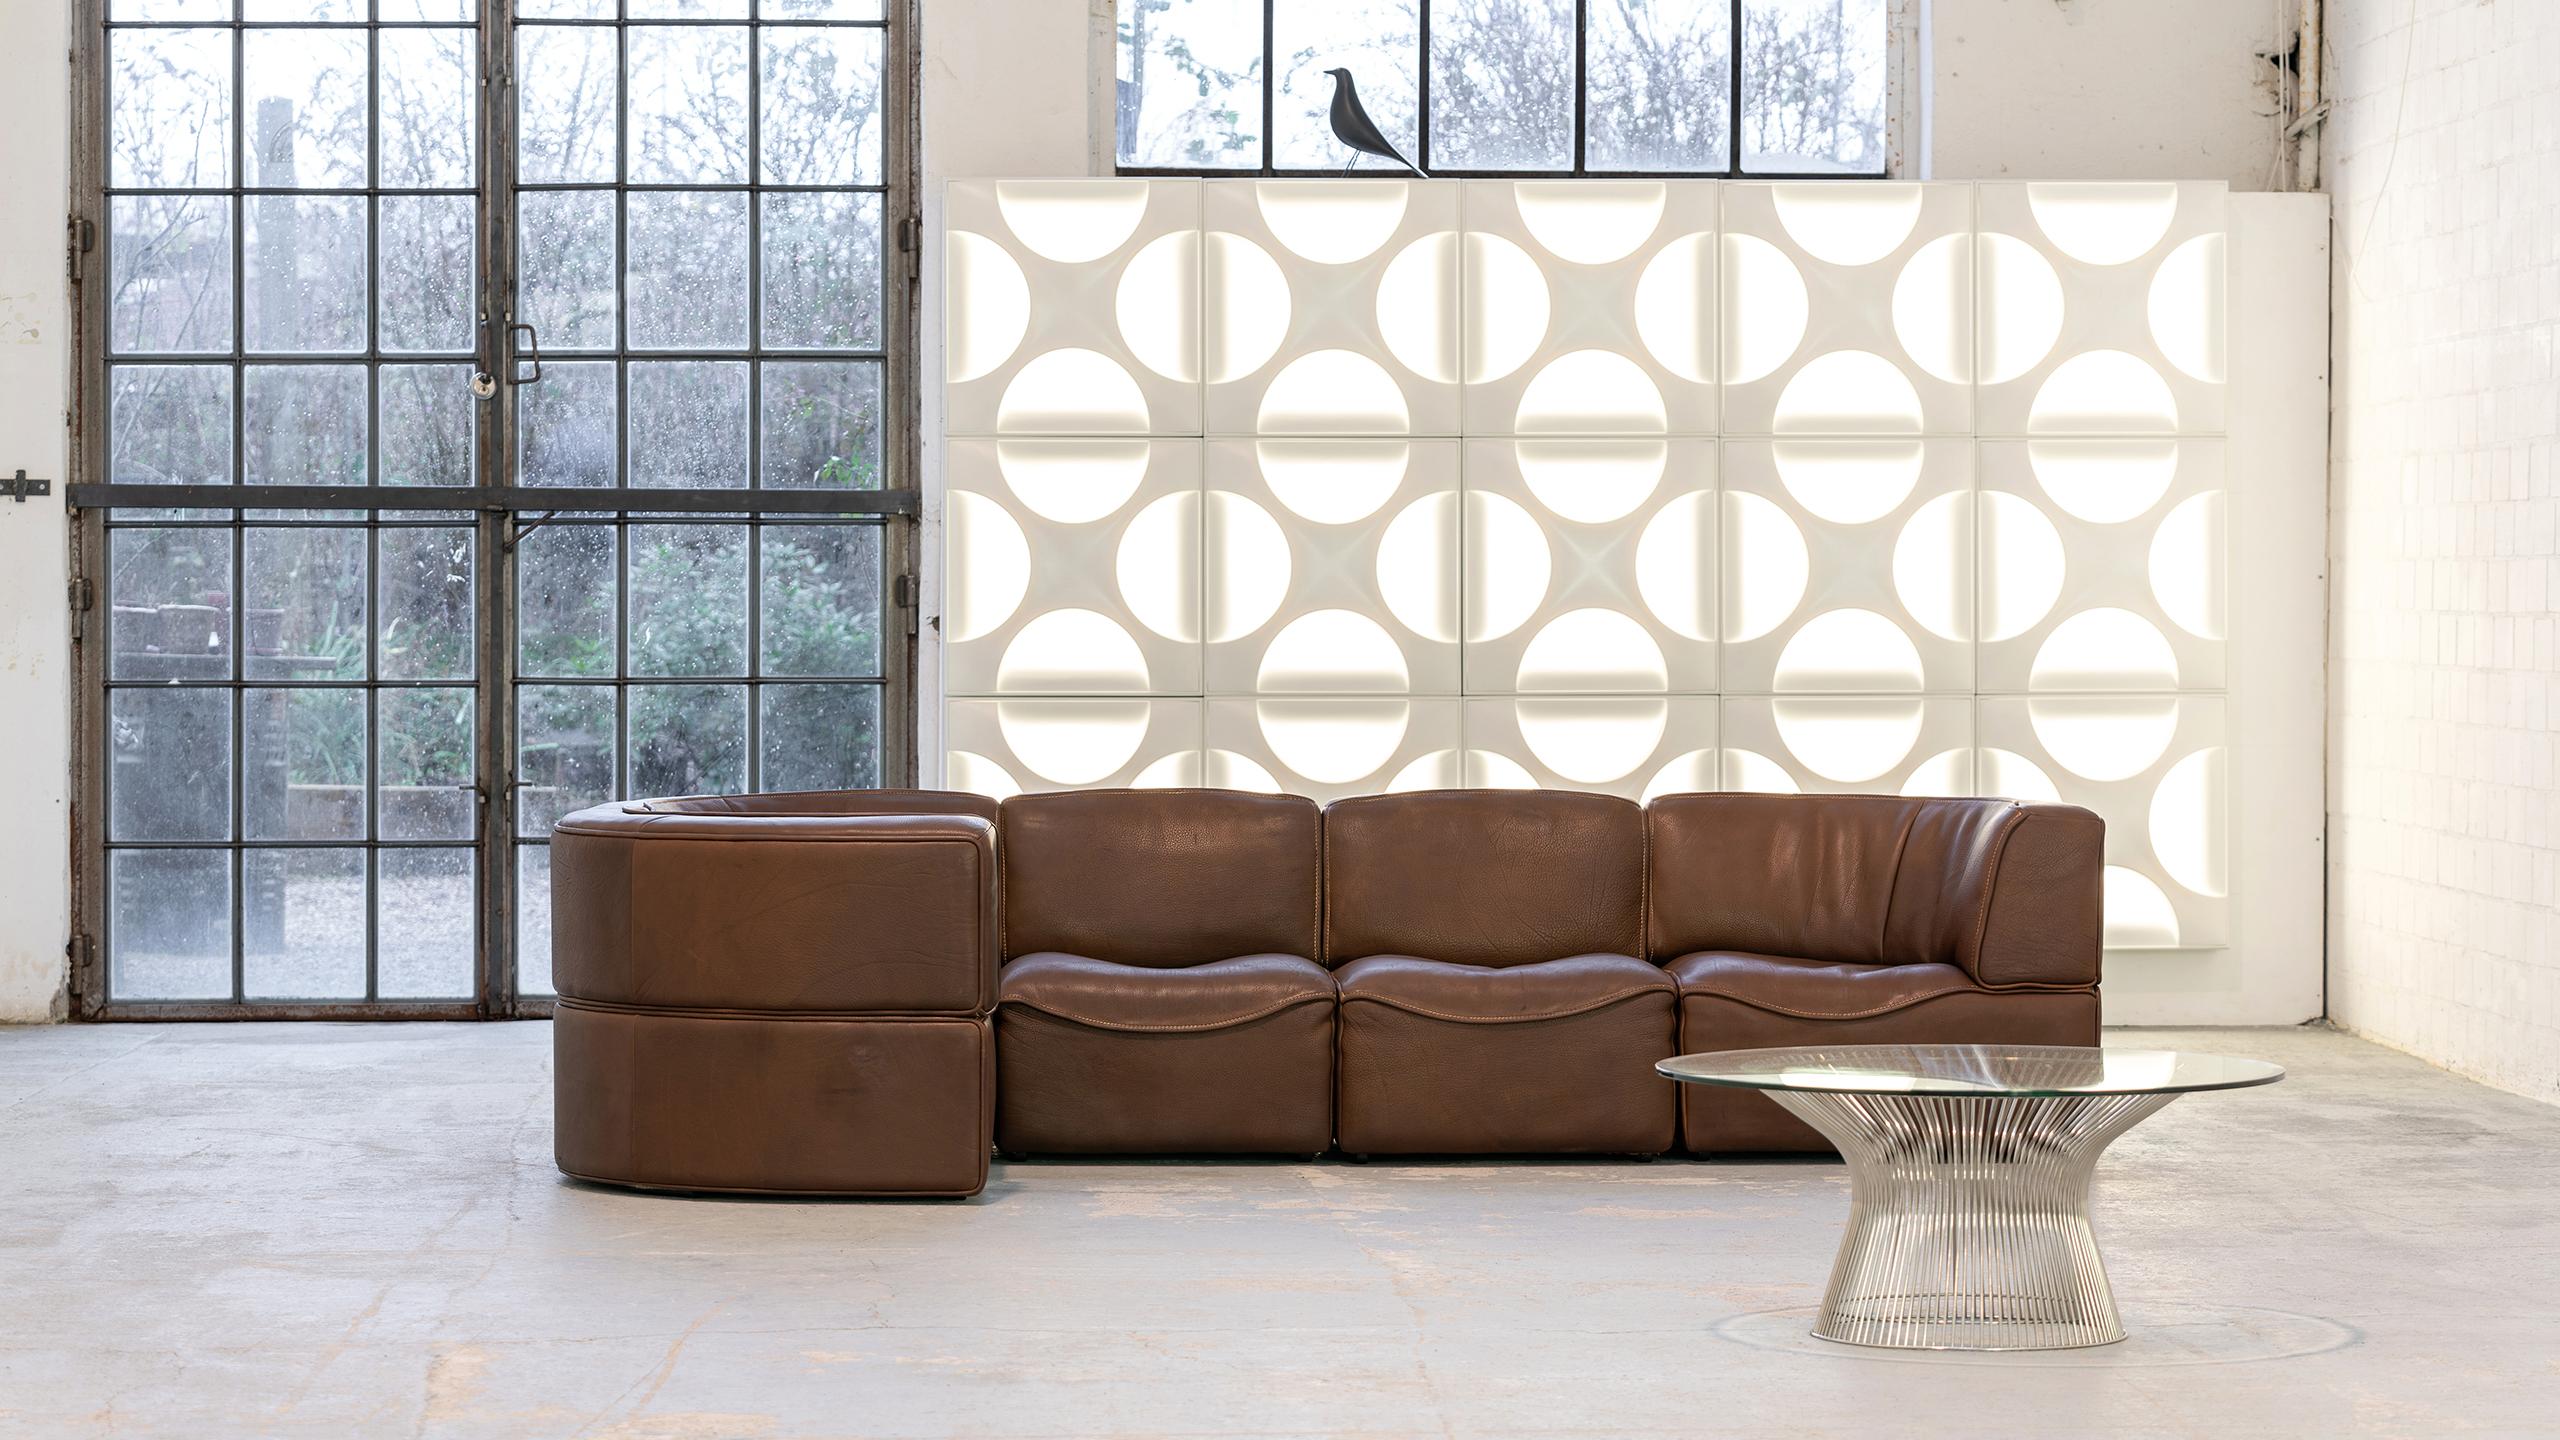 De Sede - DS-15 modular sofa in Neck leather, Switzerland, manufactured in the 1970s.

This high quality sectional sofa, designed by De Sede in the 1970s, consists of 2 regular elements and 3 corner elements, 
which allow you to assemble this